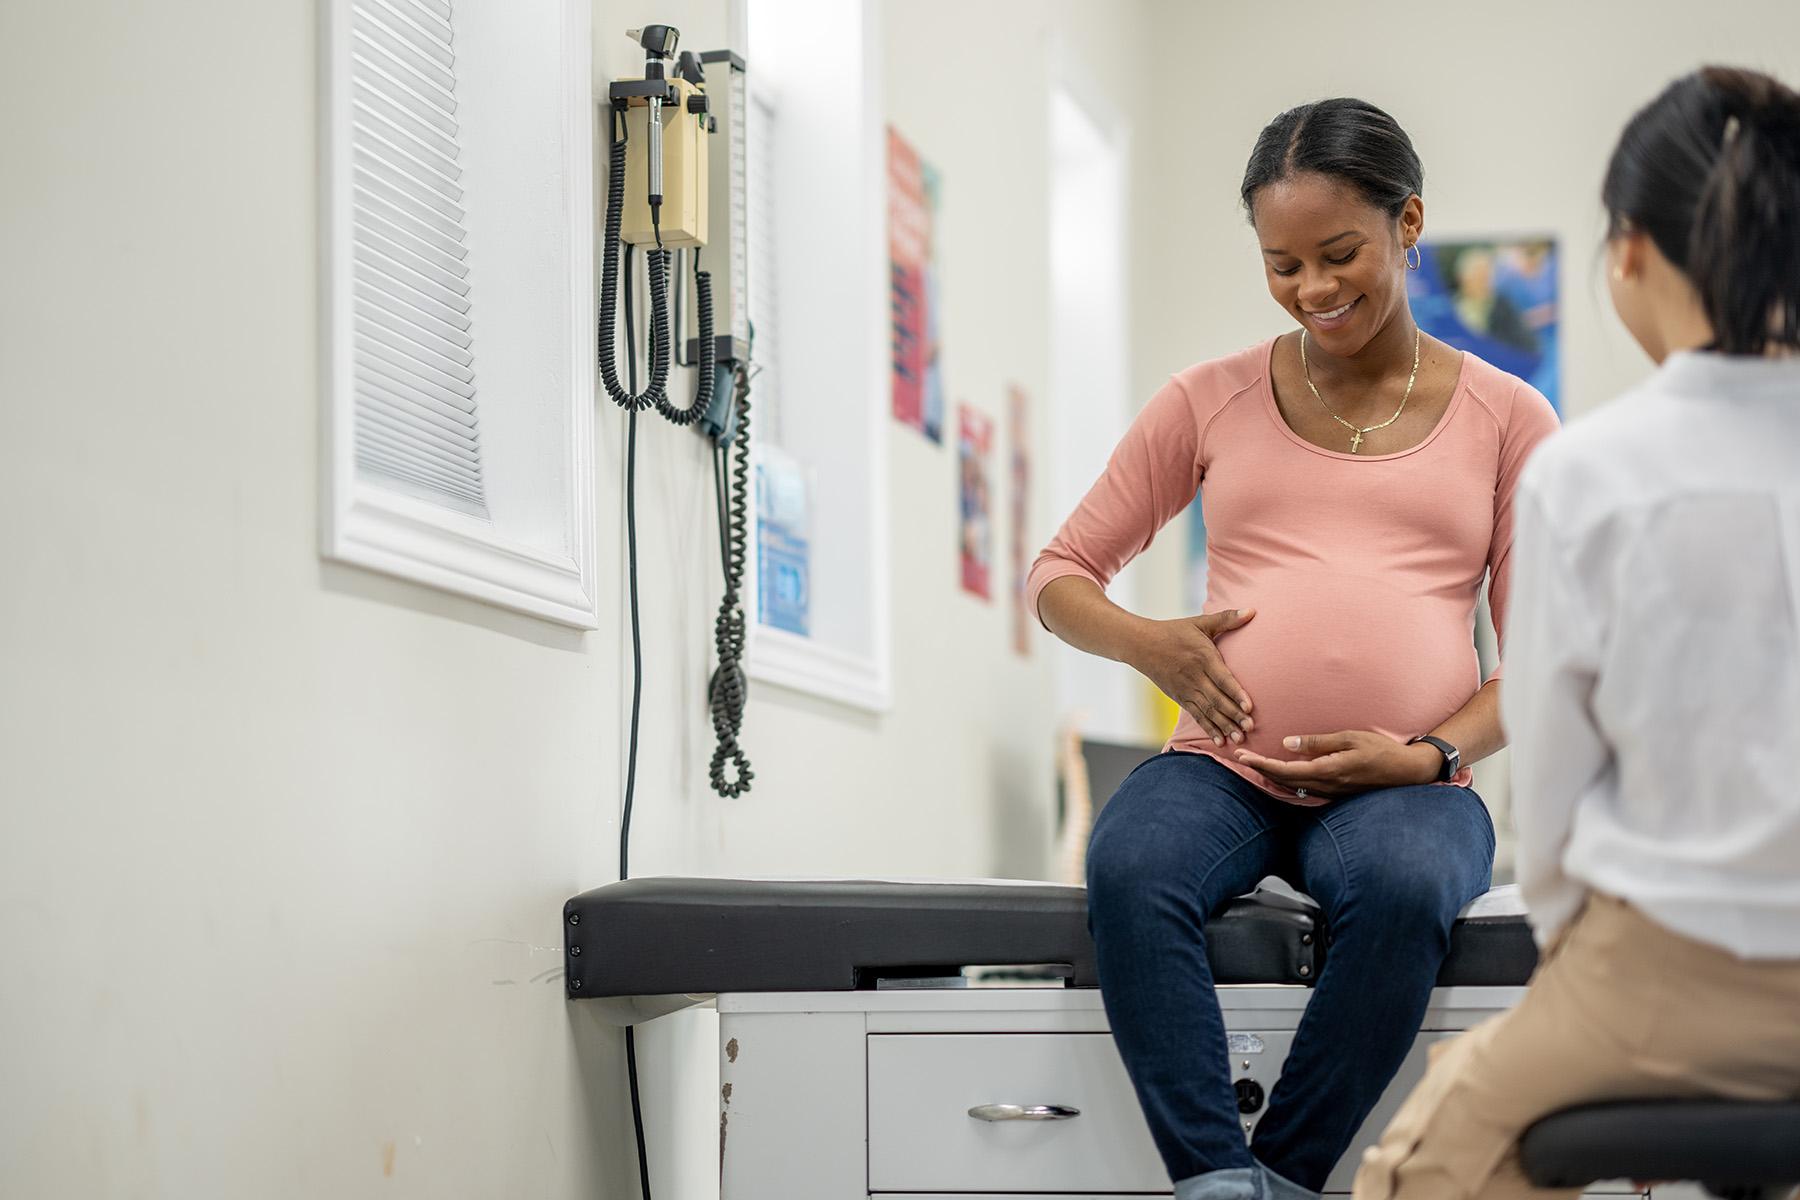 A pregnant woman smiles, as she sit up on an exam table in her doctors office during a routine prenatal check-up.